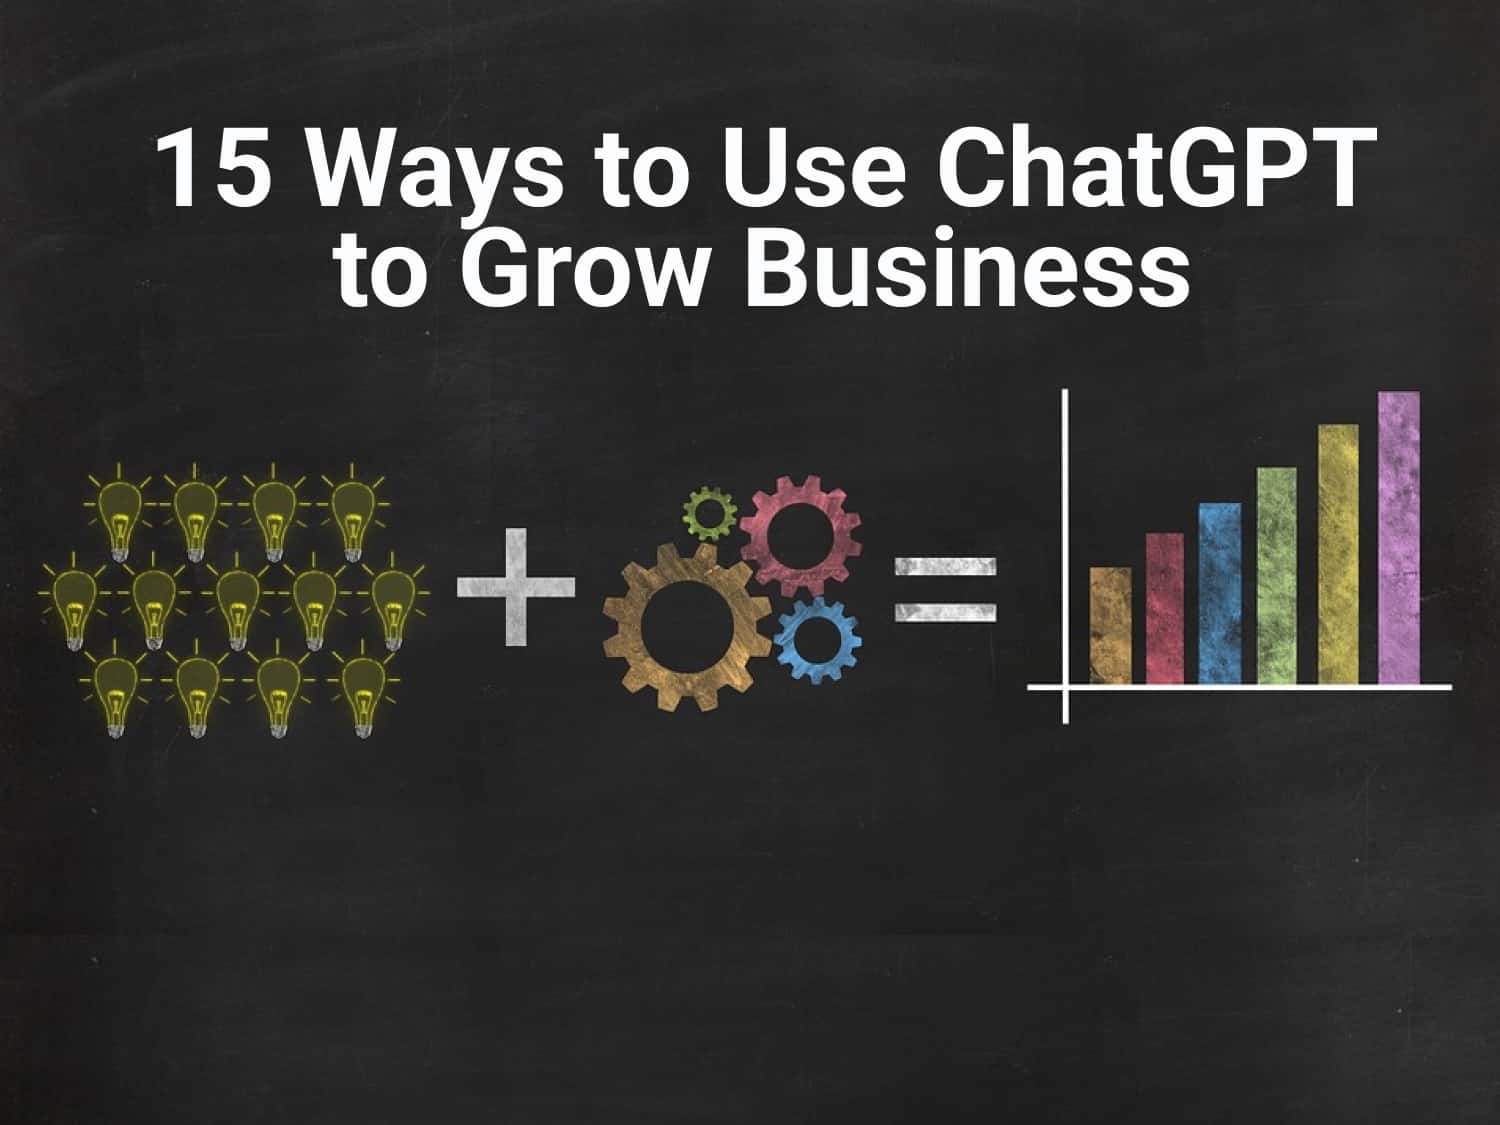 15 ways to use ChatGPT for business